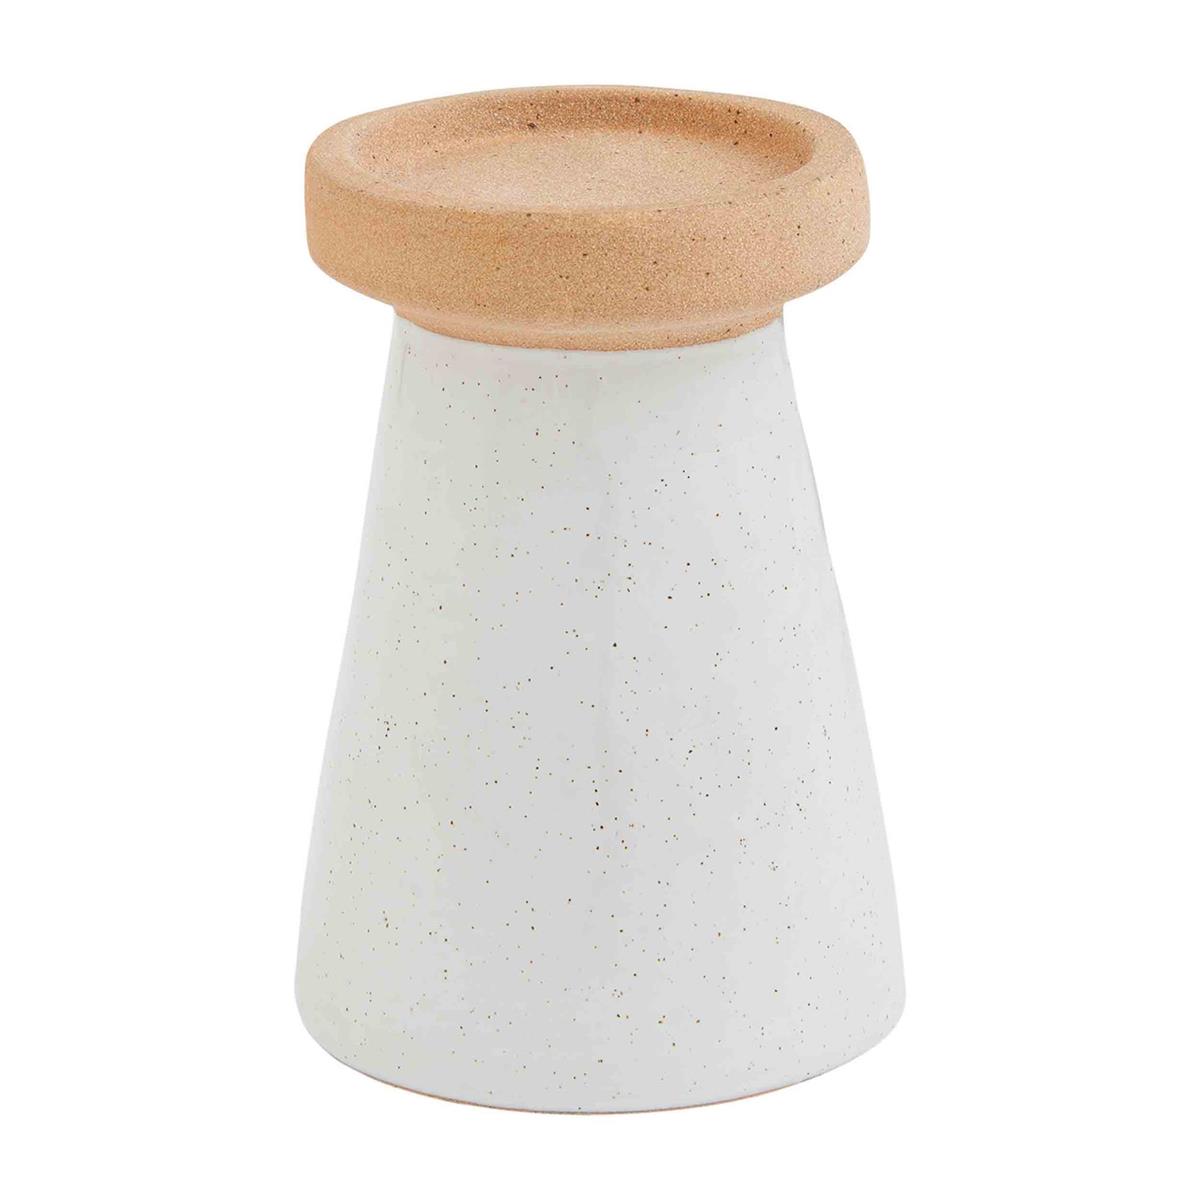 Tall Terracotta Candle Holder